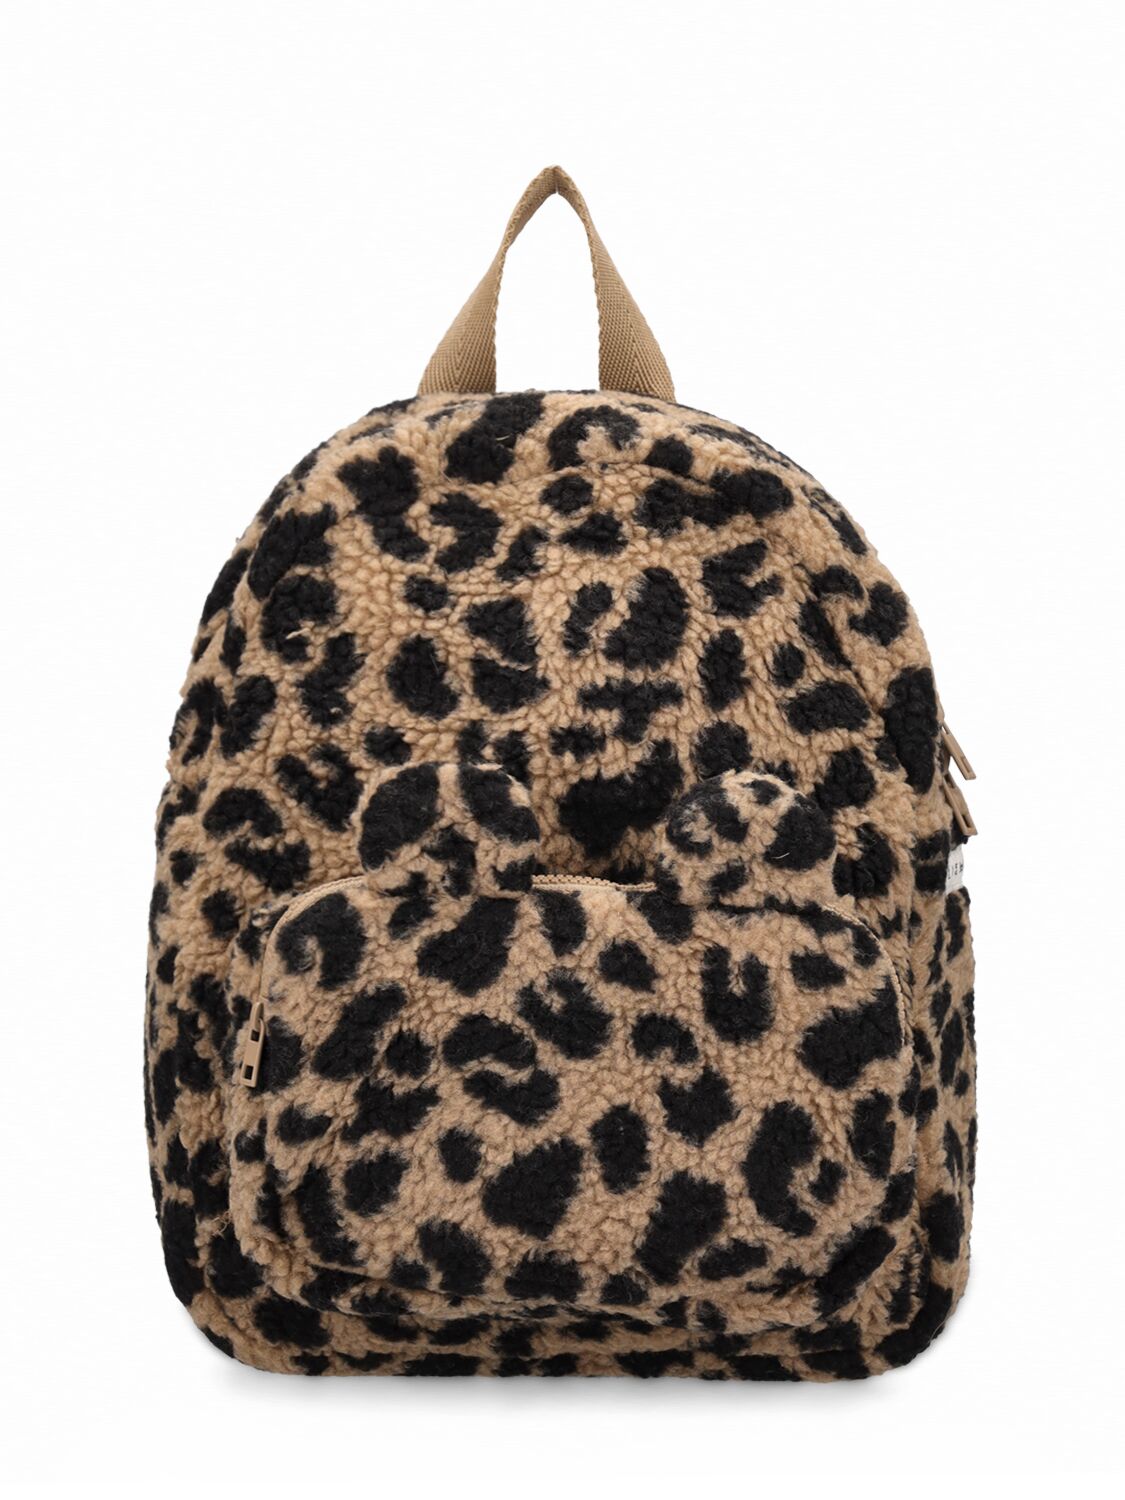 Image of Leopard Teddy Backpack